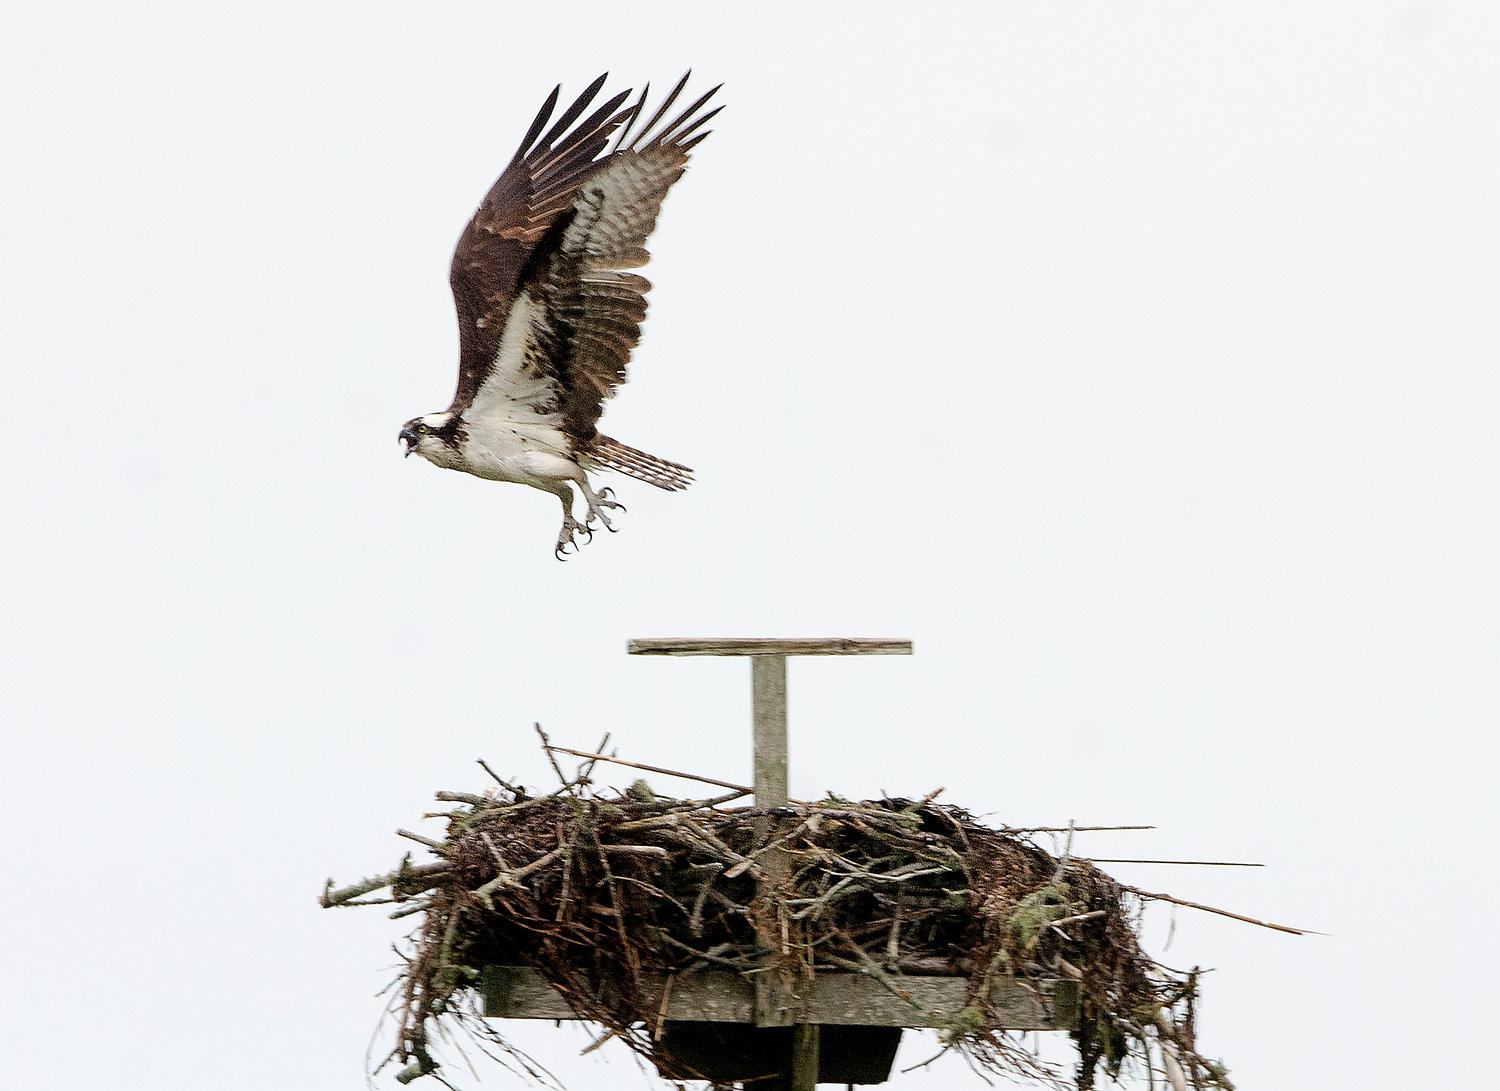 An adult osprey leaps off its nest as 
Tih-Fen Ting and Dr. Alan Poole approach in their skiff. It called out with a high-pitched whistling, chirp and soared off in hopes to lure the vessel away from the nest.